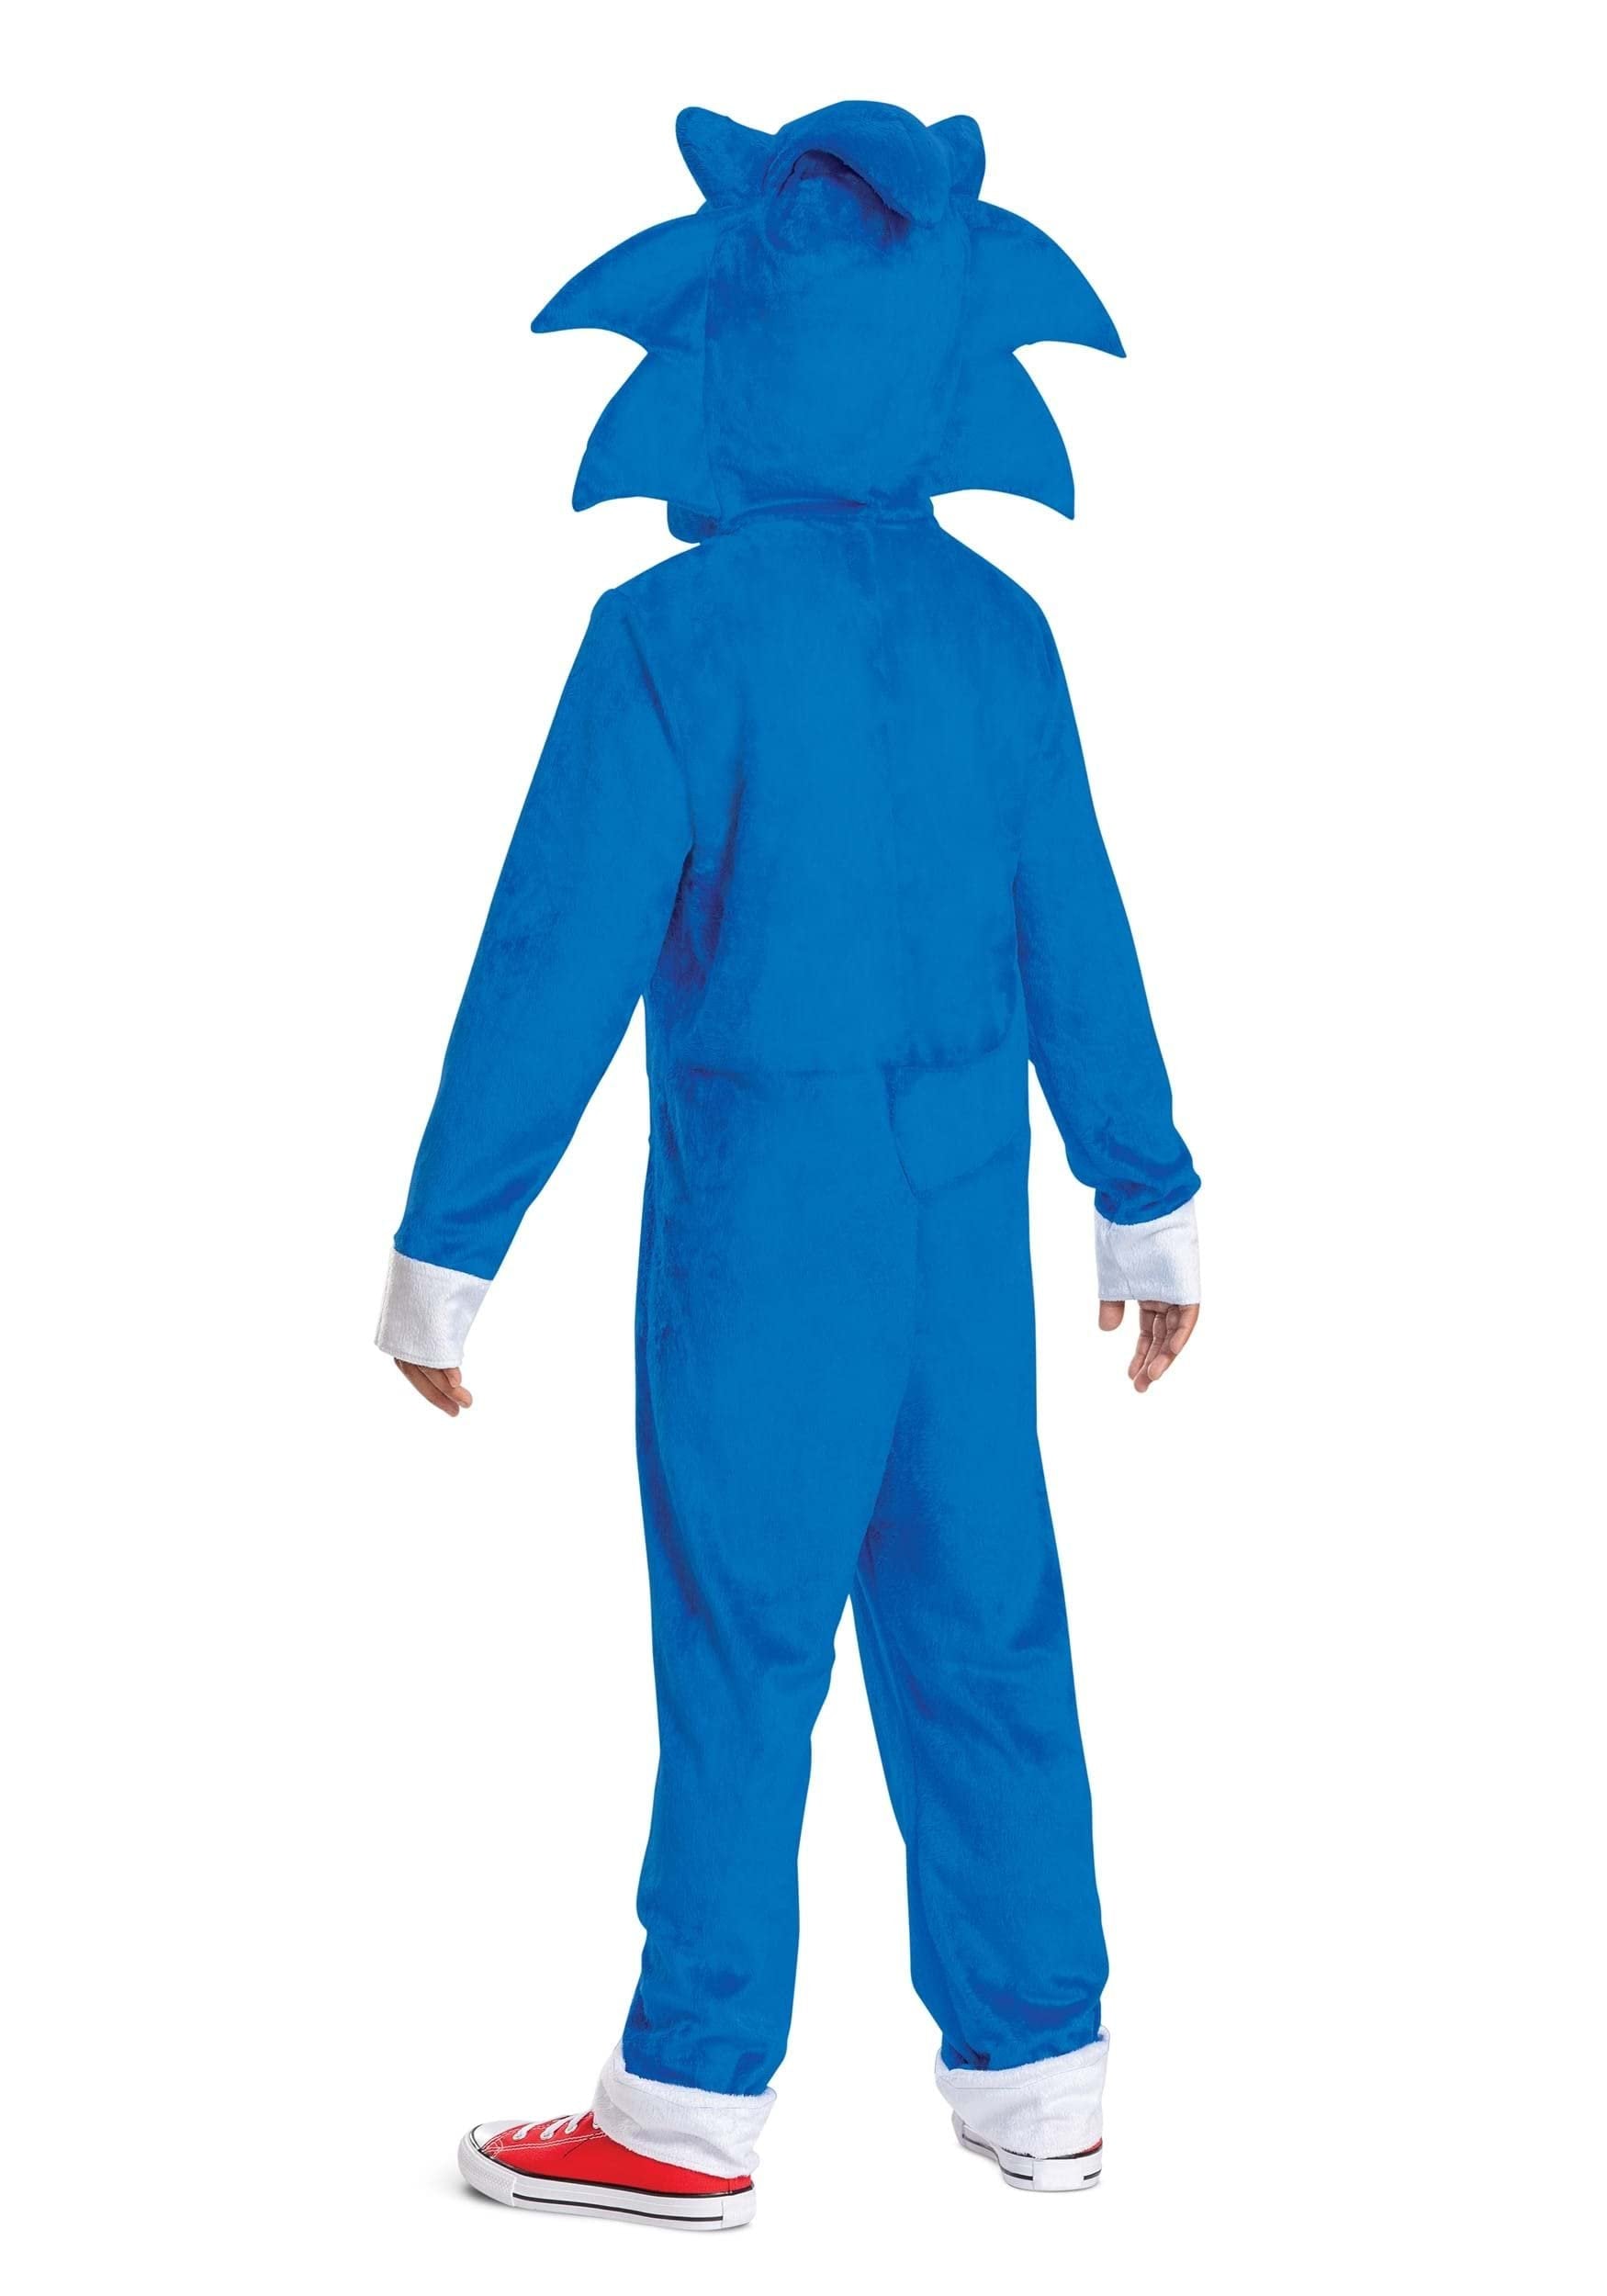 Sonic the Hedgehog Costume, Official Sonic Movie Costume and Headpiece, Kids Size Large (10-12)